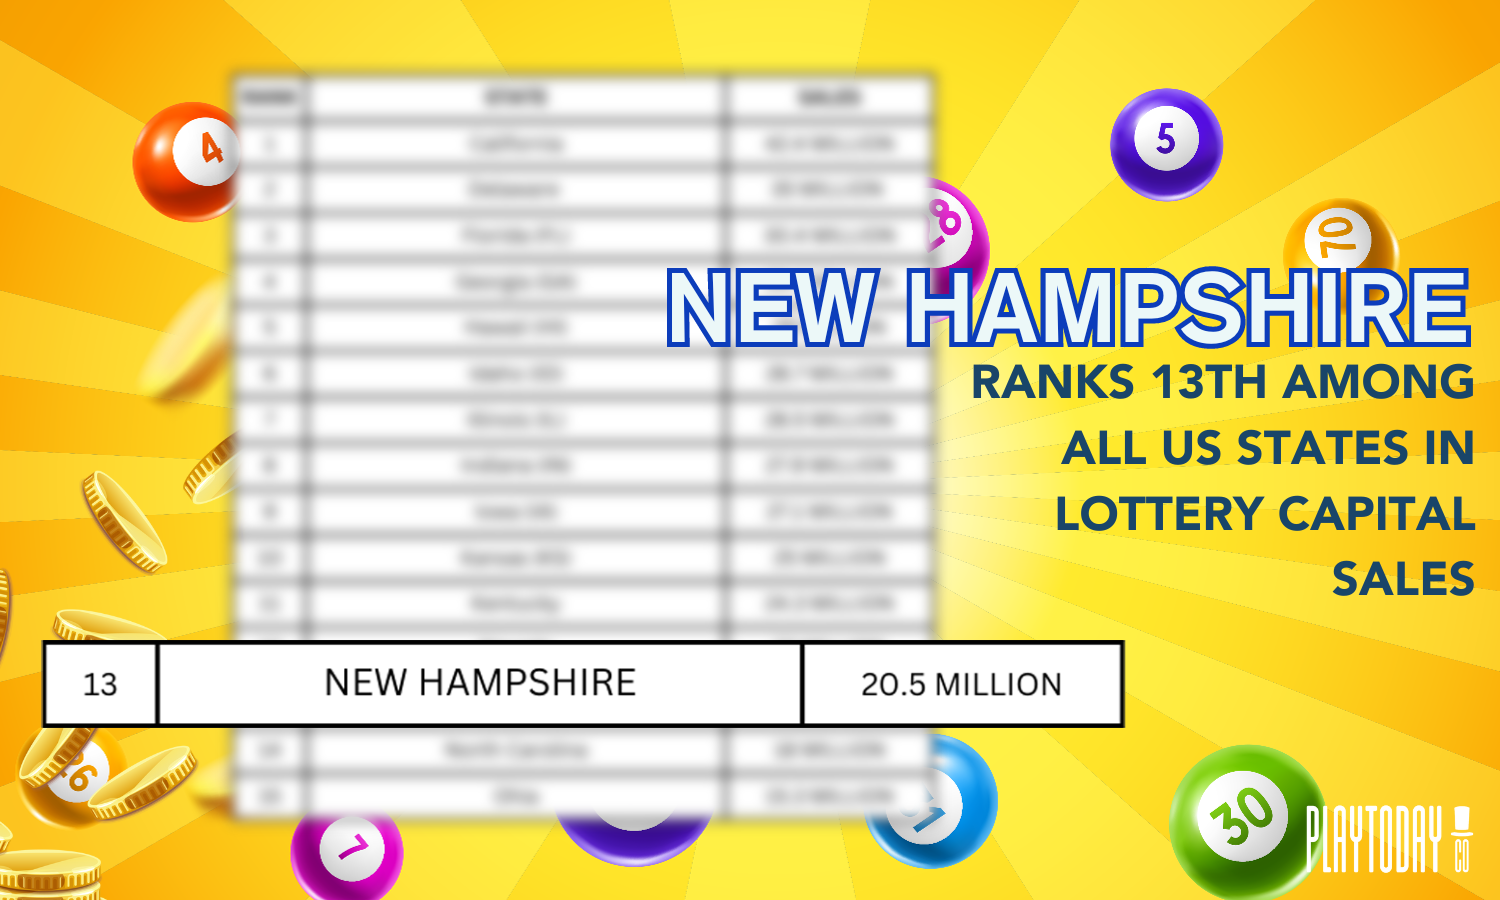 New Hampshire Ranks 13th in All US States Lottery Capital Sales